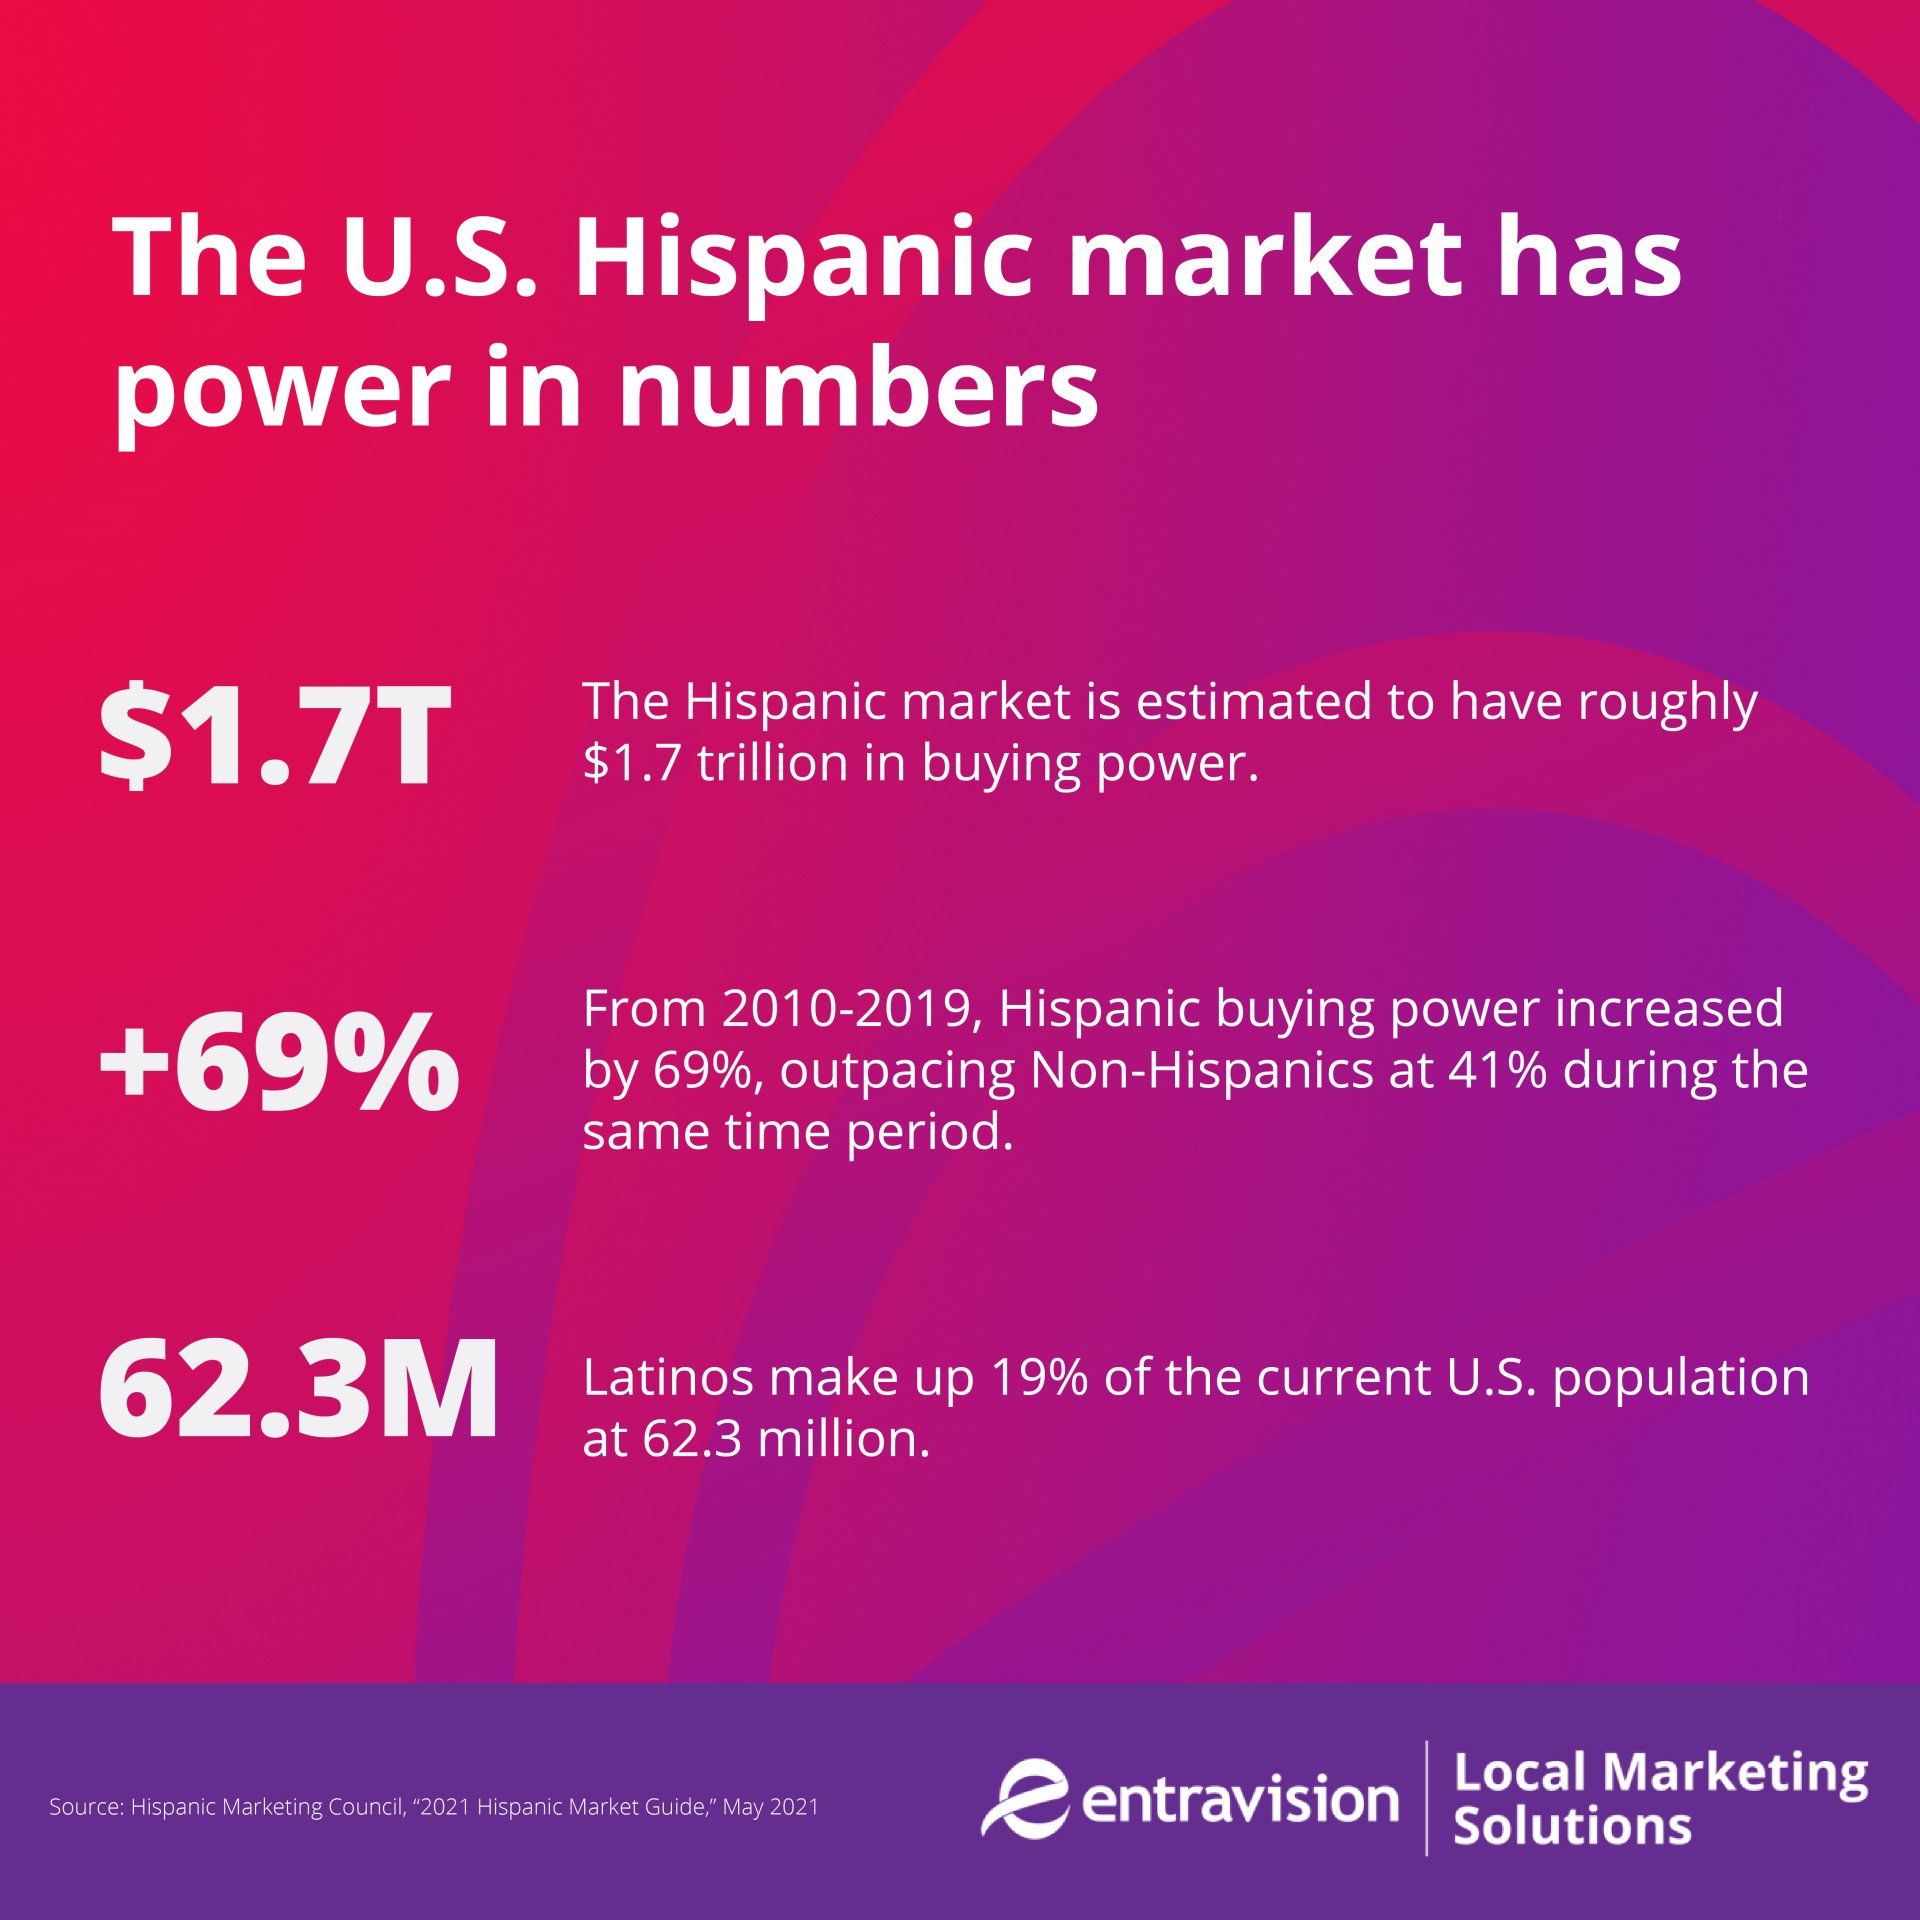 An infographic chart shows that reaching the U.S. Hispanic market is crucial given their massive  spending power, economic influence, and increasing population size. Hispanic marketing is vital!